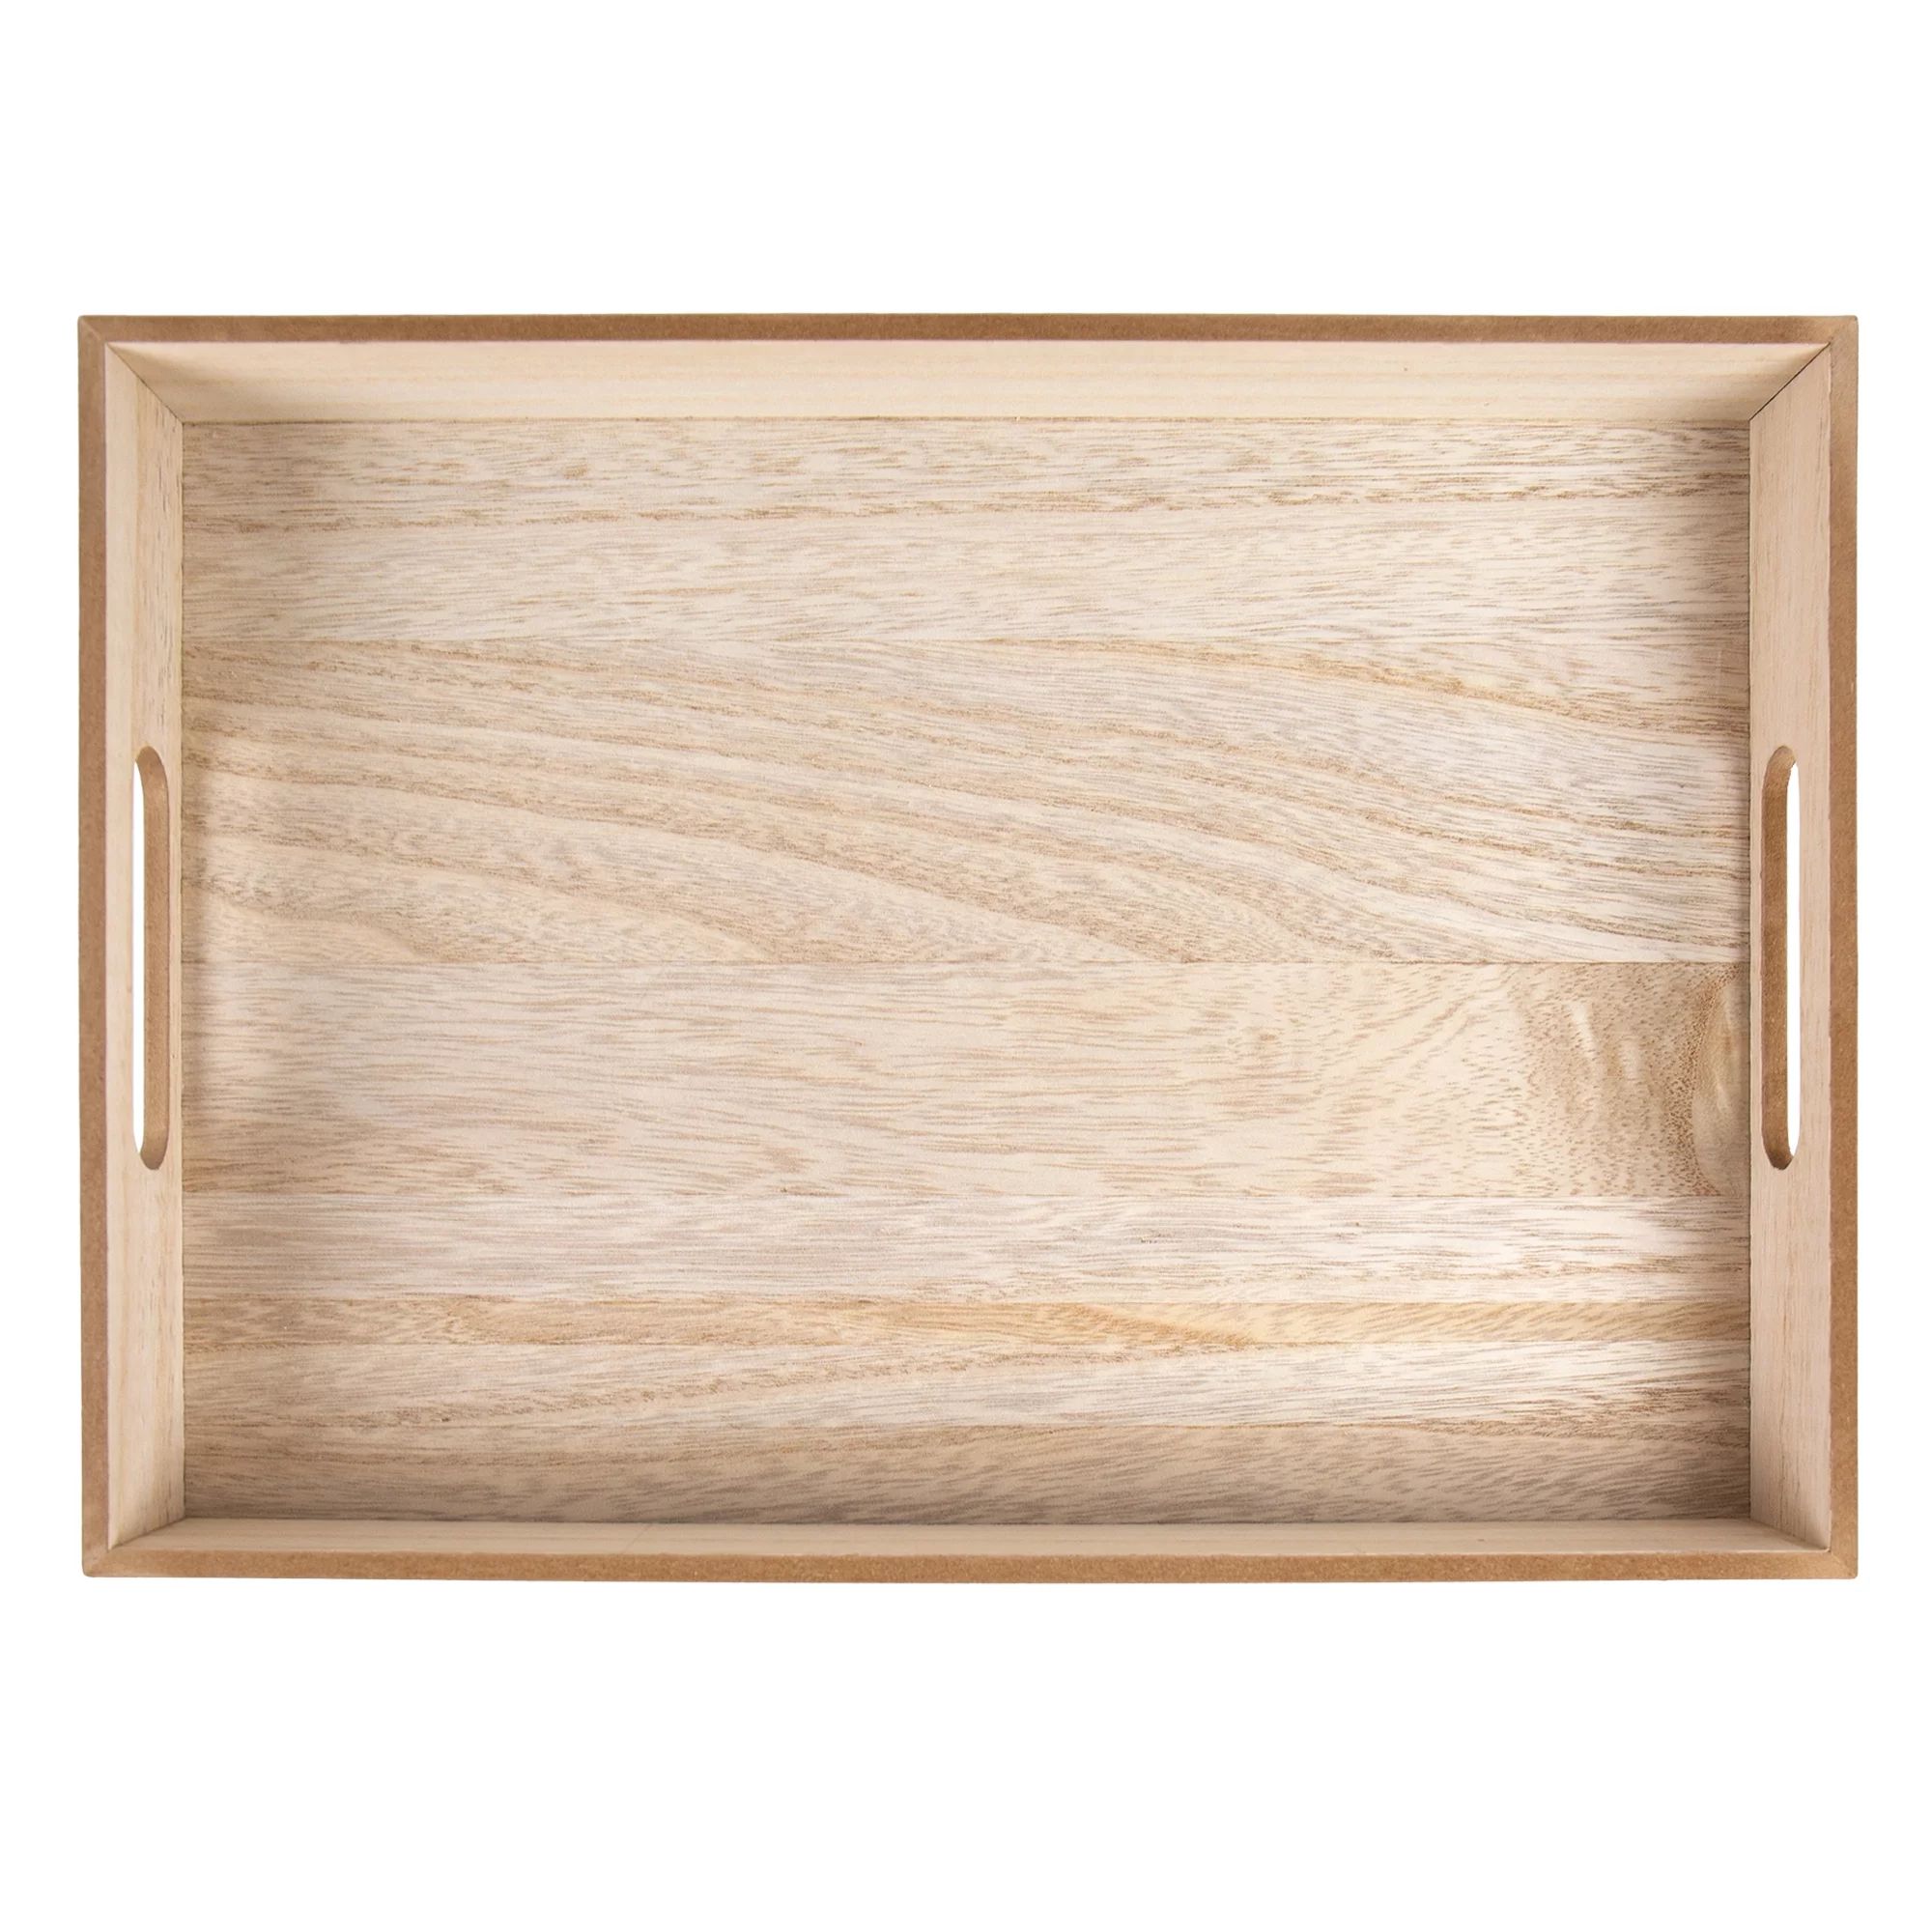 On the Surface Decorative Square Tray, Customizable Wooden Serving Tray with Handles | Walmart (US)